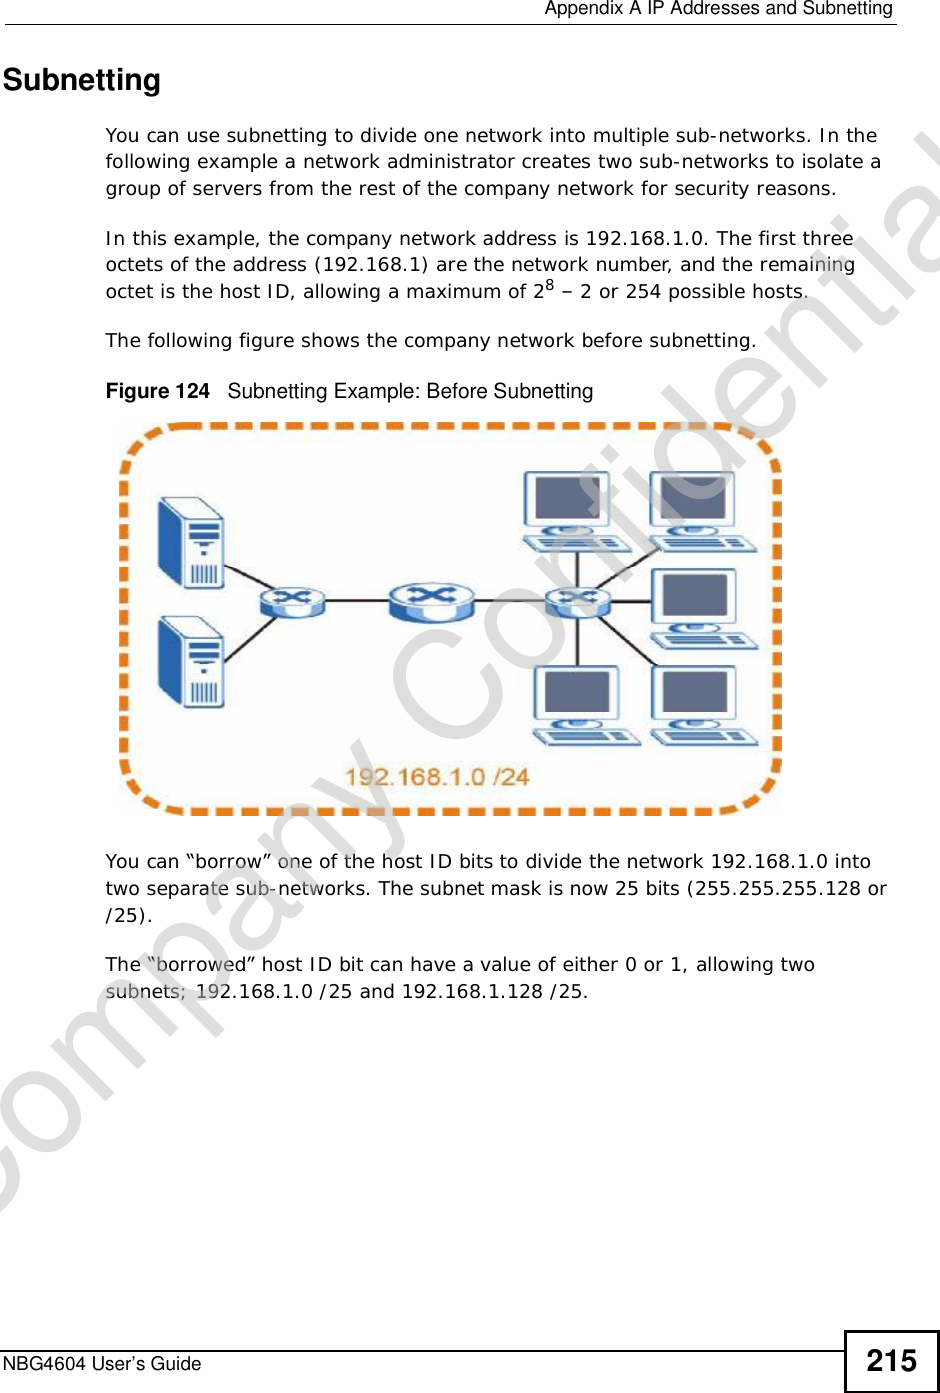  Appendix AIP Addresses and SubnettingNBG4604 User’s Guide 215SubnettingYou can use subnetting to divide one network into multiple sub-networks. In the following example a network administrator creates two sub-networks to isolate a group of servers from the rest of the company network for security reasons.In this example, the company network address is 192.168.1.0. The first three octets of the address (192.168.1) are the network number, and the remaining octet is the host ID, allowing a maximum of 28 – 2 or 254 possible hosts.The following figure shows the company network before subnetting.  Figure 124   Subnetting Example: Before SubnettingYou can “borrow” one of the host ID bits to divide the network 192.168.1.0 into two separate sub-networks. The subnet mask is now 25 bits (255.255.255.128 or /25).The “borrowed” host ID bit can have a value of either 0 or 1, allowing two subnets; 192.168.1.0 /25 and 192.168.1.128 /25. Company Confidential